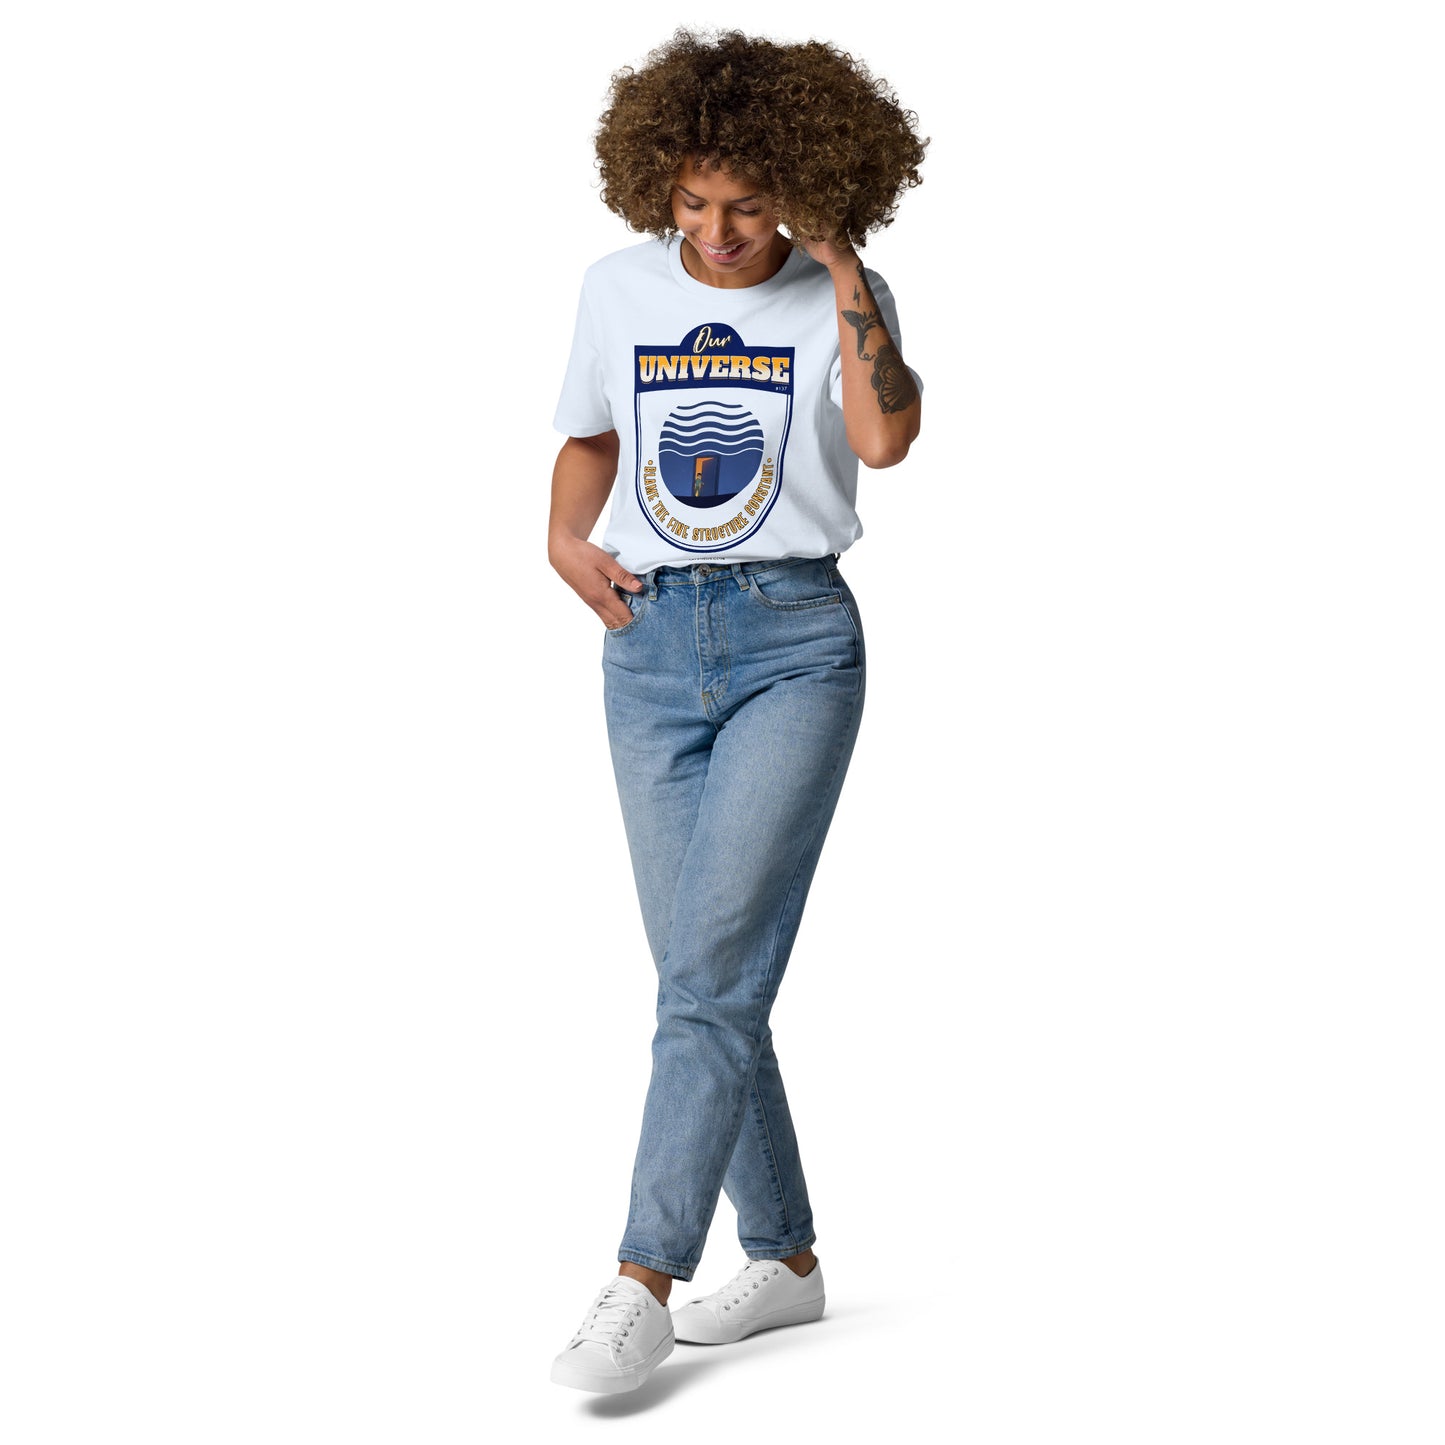 Unisex organic cotton t-shirt - Our Universe, Balanced On the Fine Structure Constant